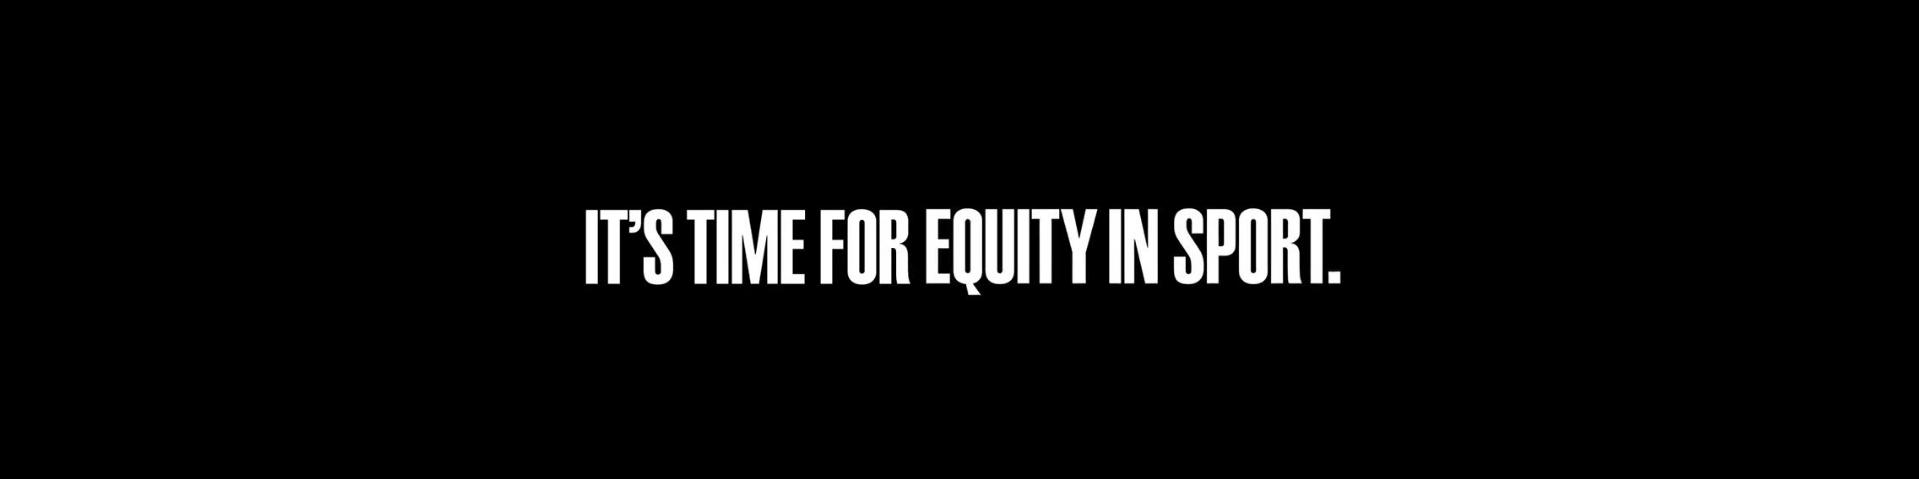 It's time for equity in sport